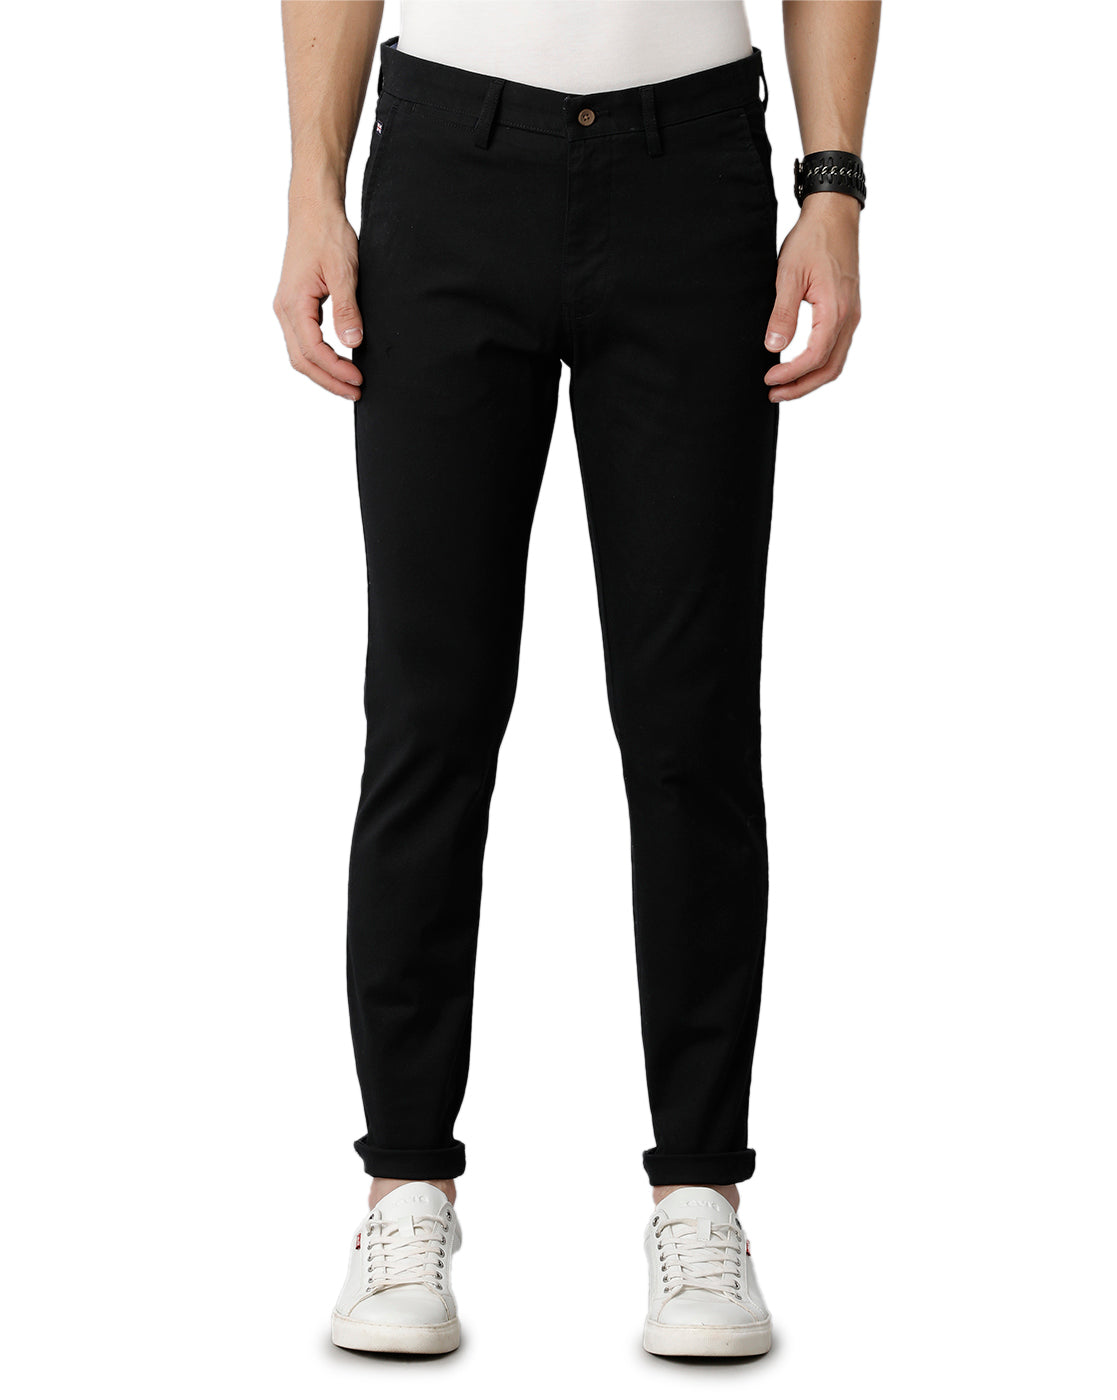 Black Solid Casual Cotton Trouser - Double Two